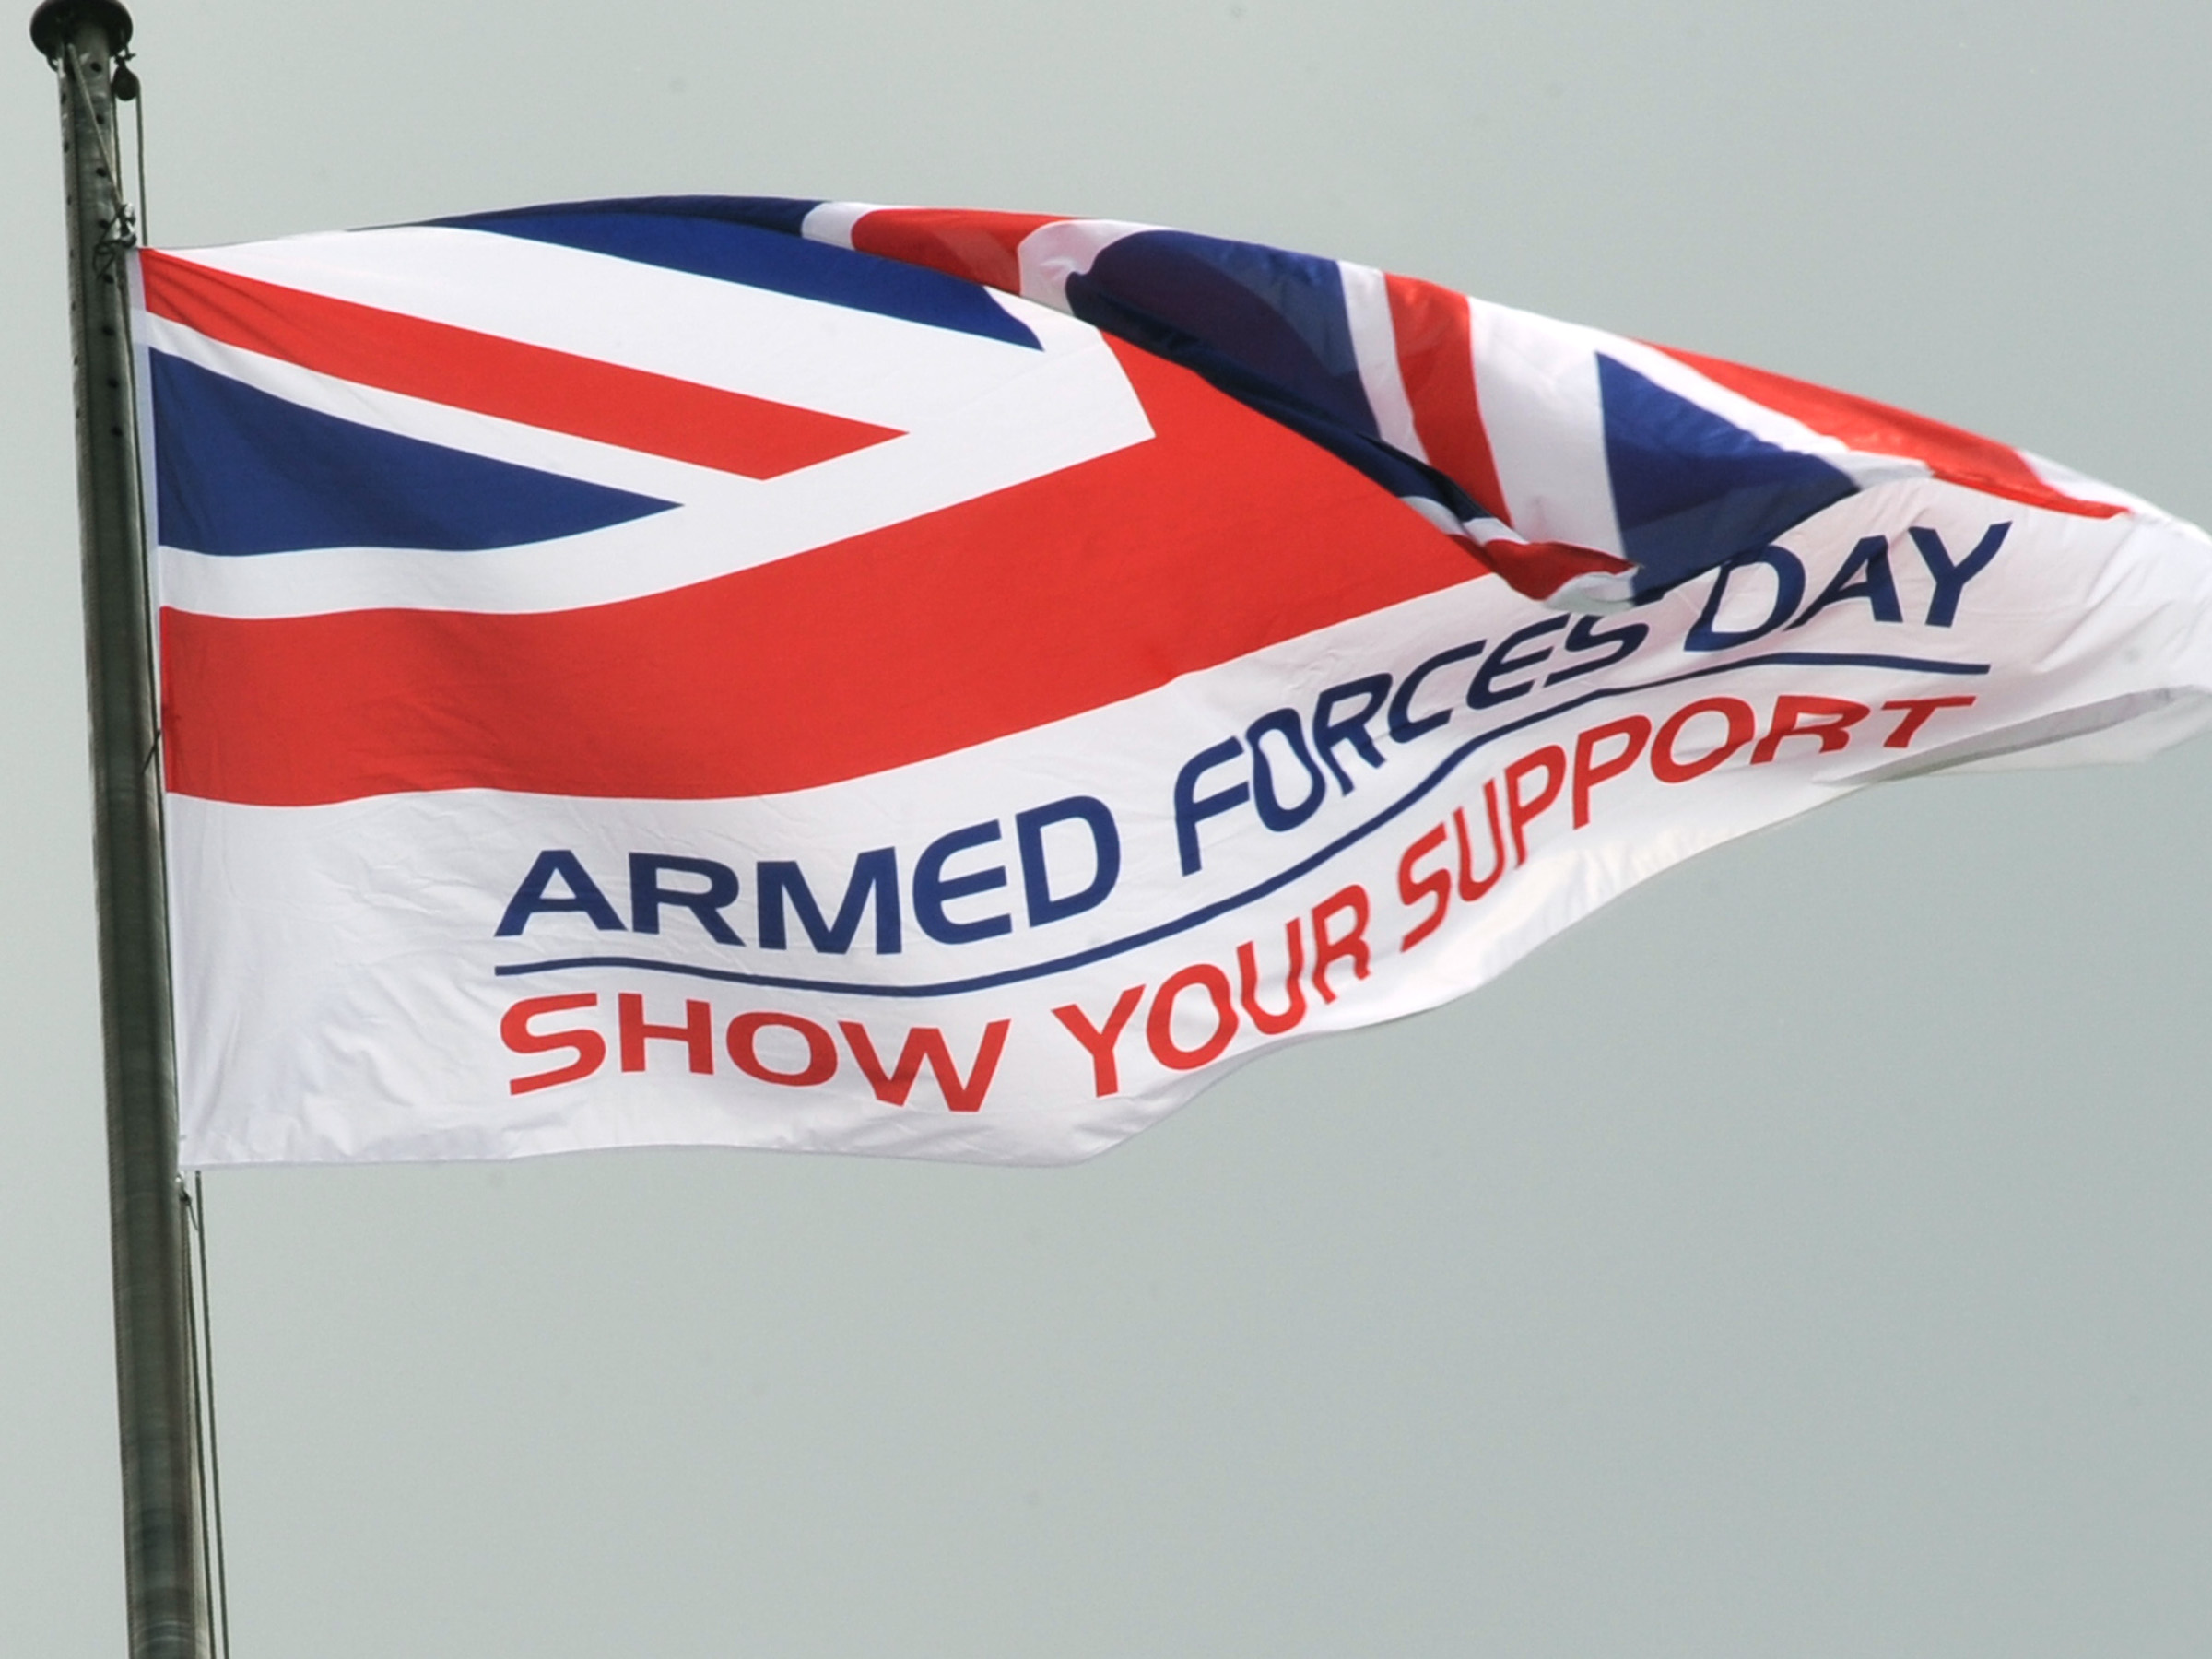 CAMPAIGN IDEA + RESOURCE: Armed Forces Day, 30 June